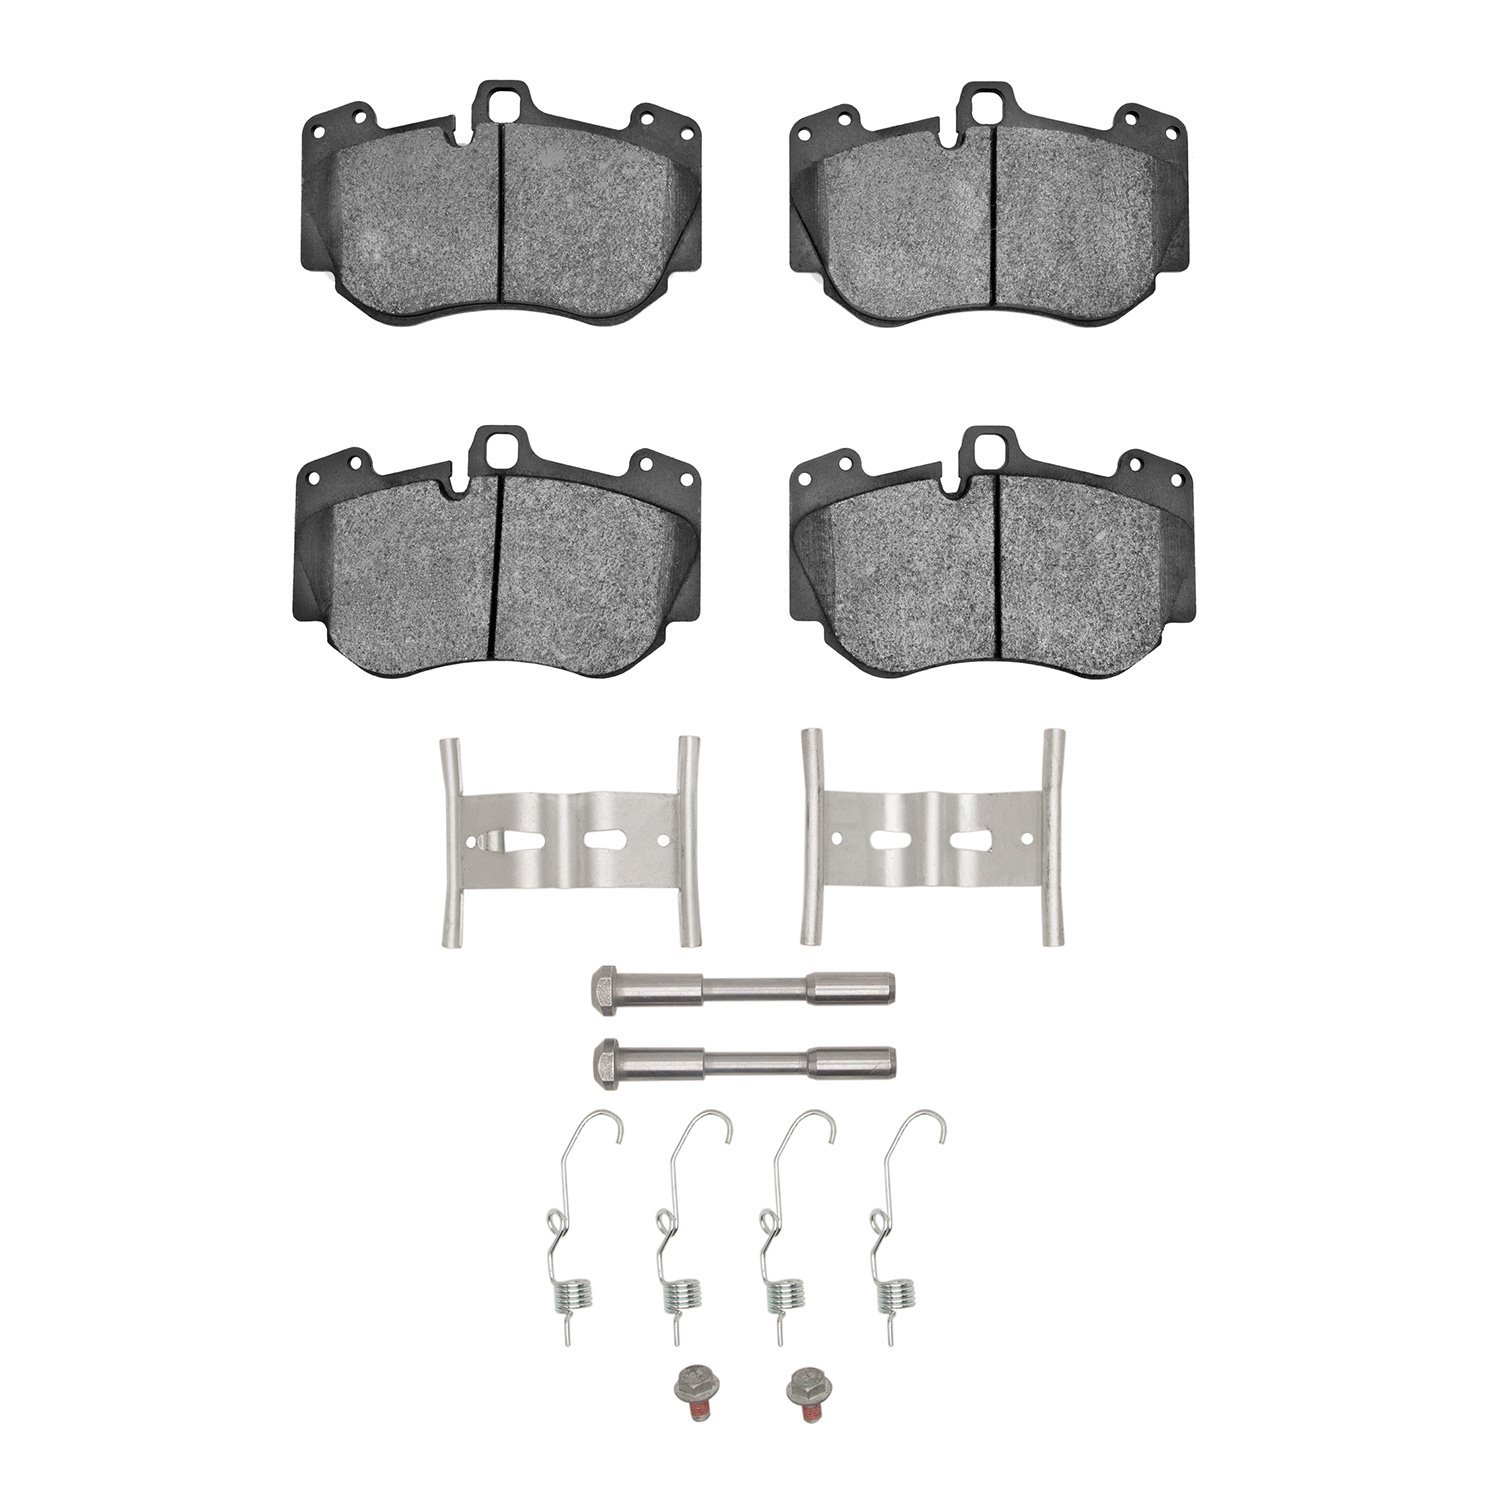 1551-1130-11 5000 Advanced Low-Metallic Brake Pads & Hardware Kit, Fits Select Multiple Makes/Models, Position: Front